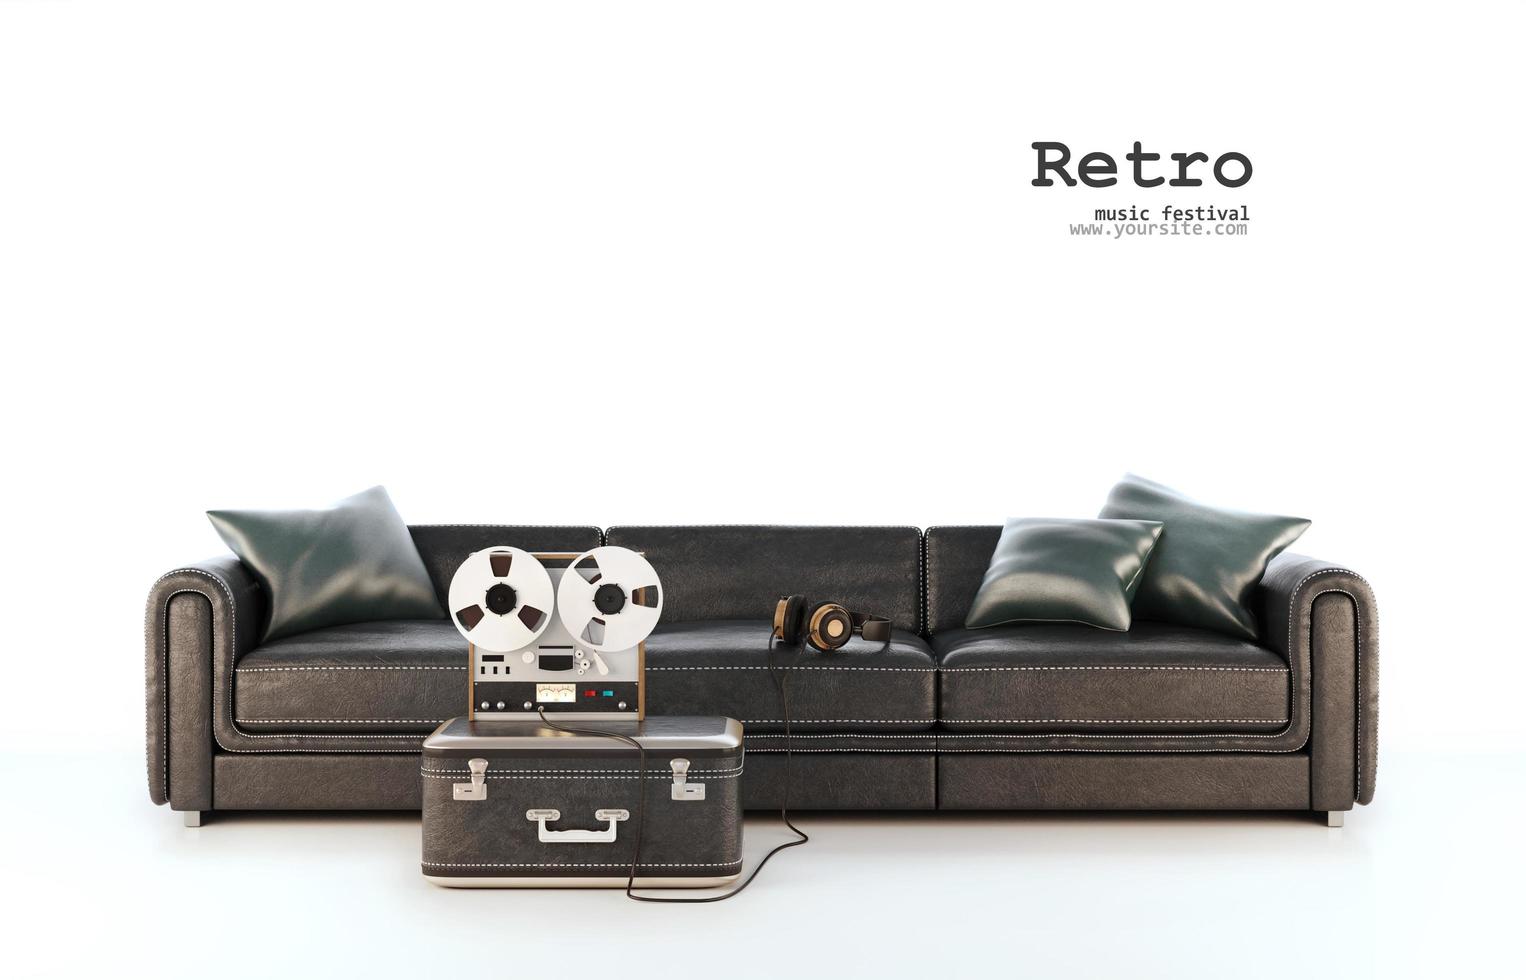 Front view of old tape recorder and baggage,Head phone with pillows on black leather sofa.White background.Vintage style.Retro music concept.3d rendering photo